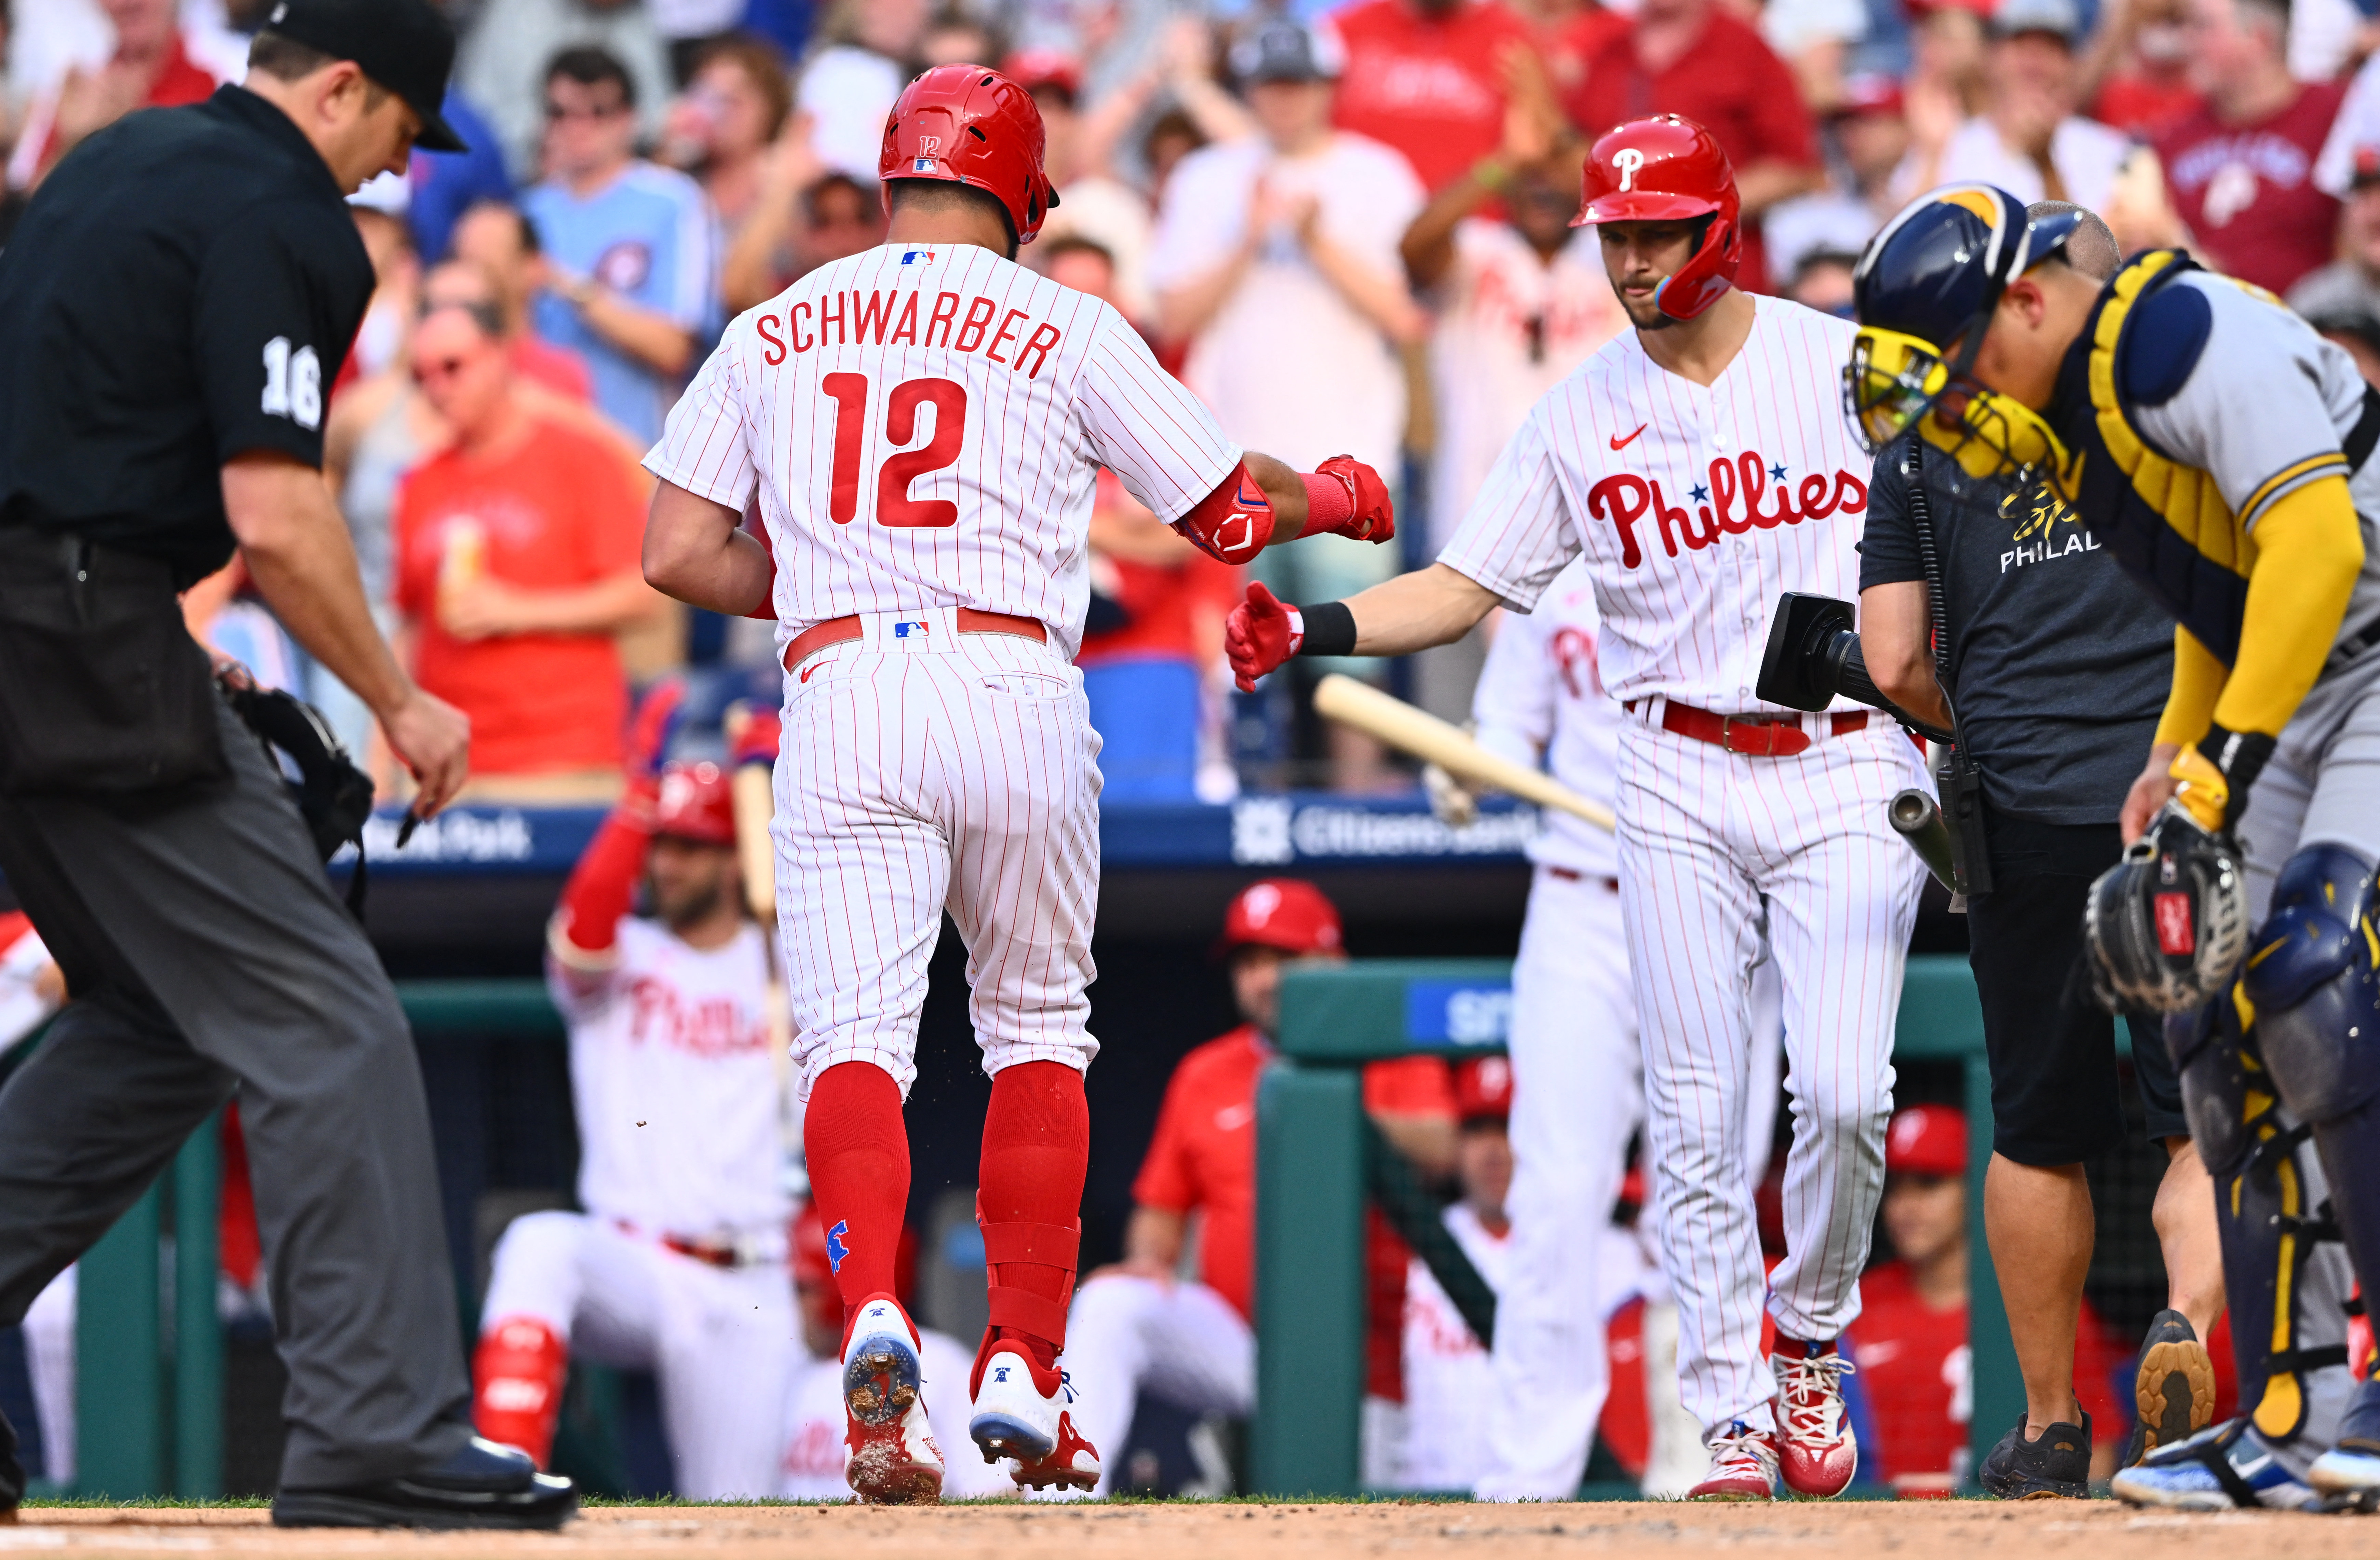 Schwarber keeps RBI streak alive, but Phillies fall to Brewers ~  Philadelphia Baseball Review - Phillies News, Rumors and Analysis